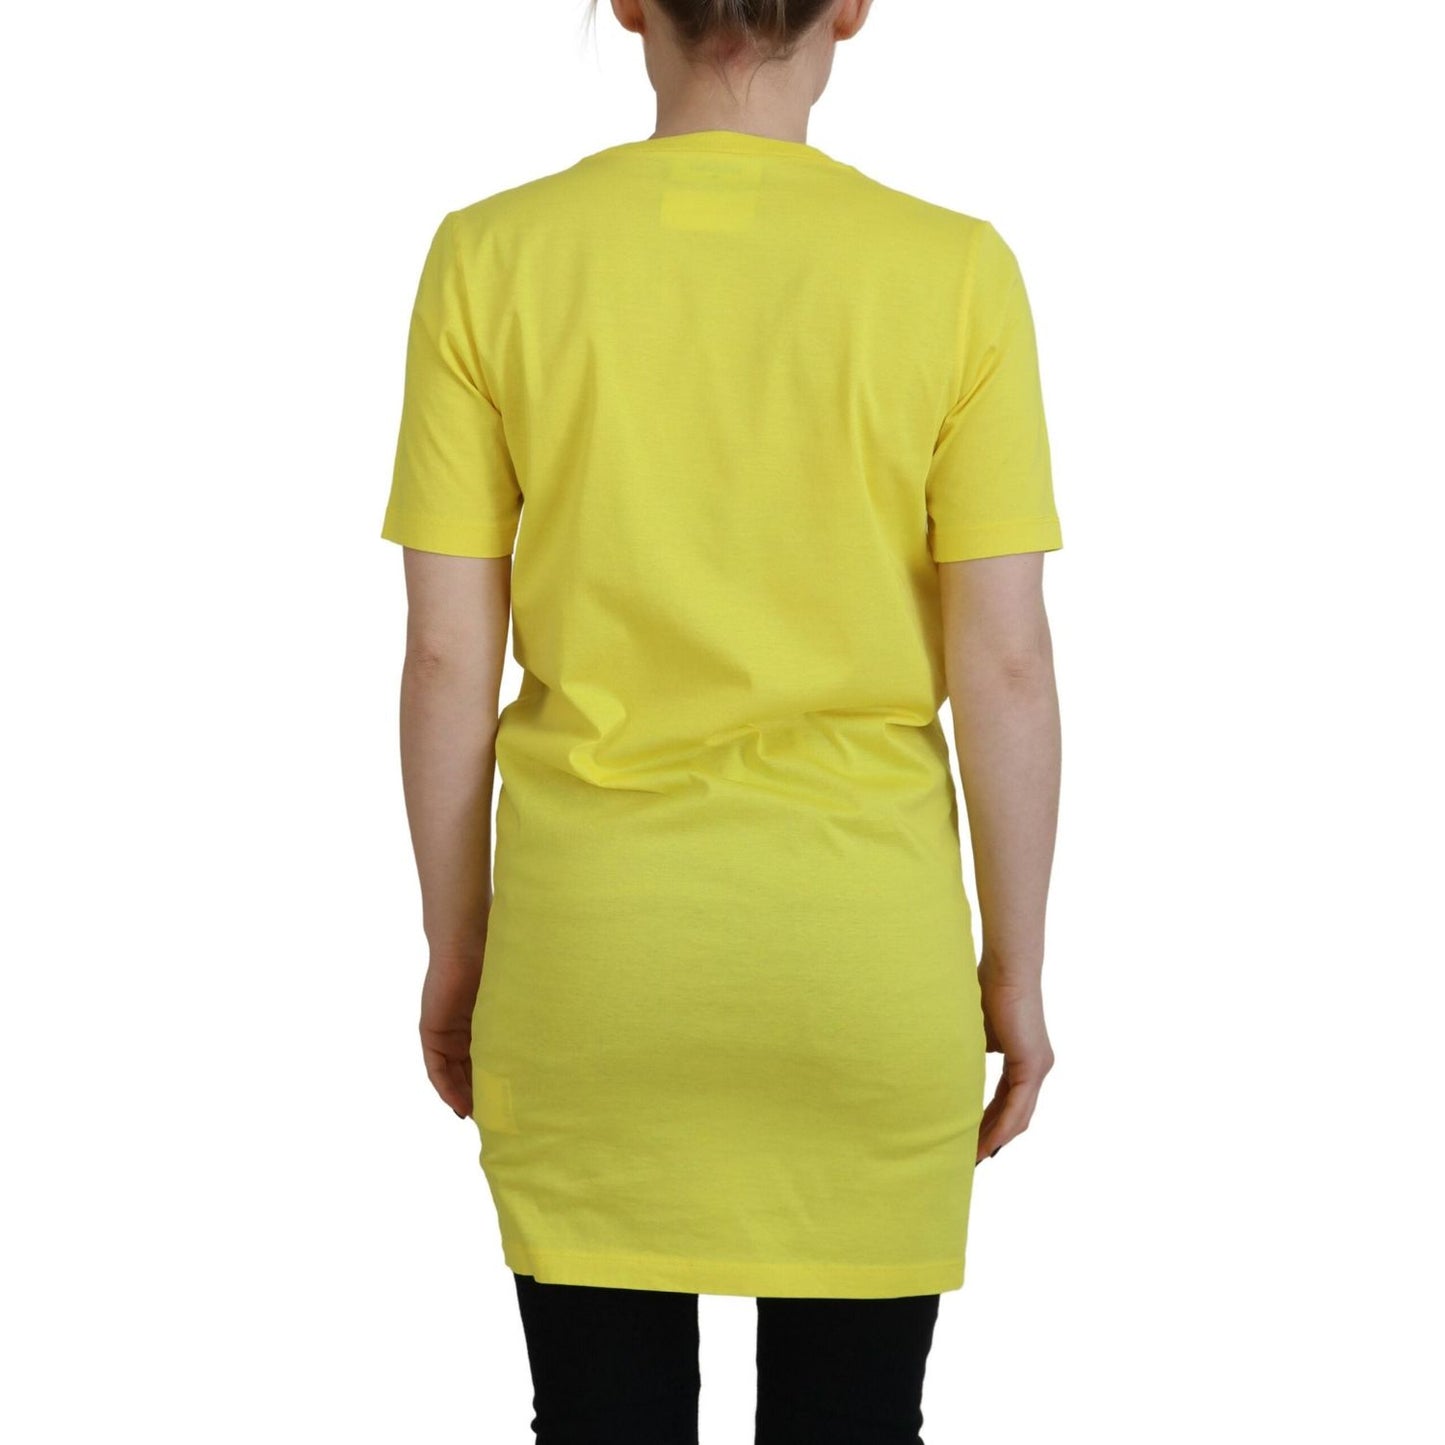 Dsquared² Yellow CottonShiny Icon Renny Dress Crewneck T-shirt yellow-cottonshiny-icon-renny-dress-crewneck-t-shirt